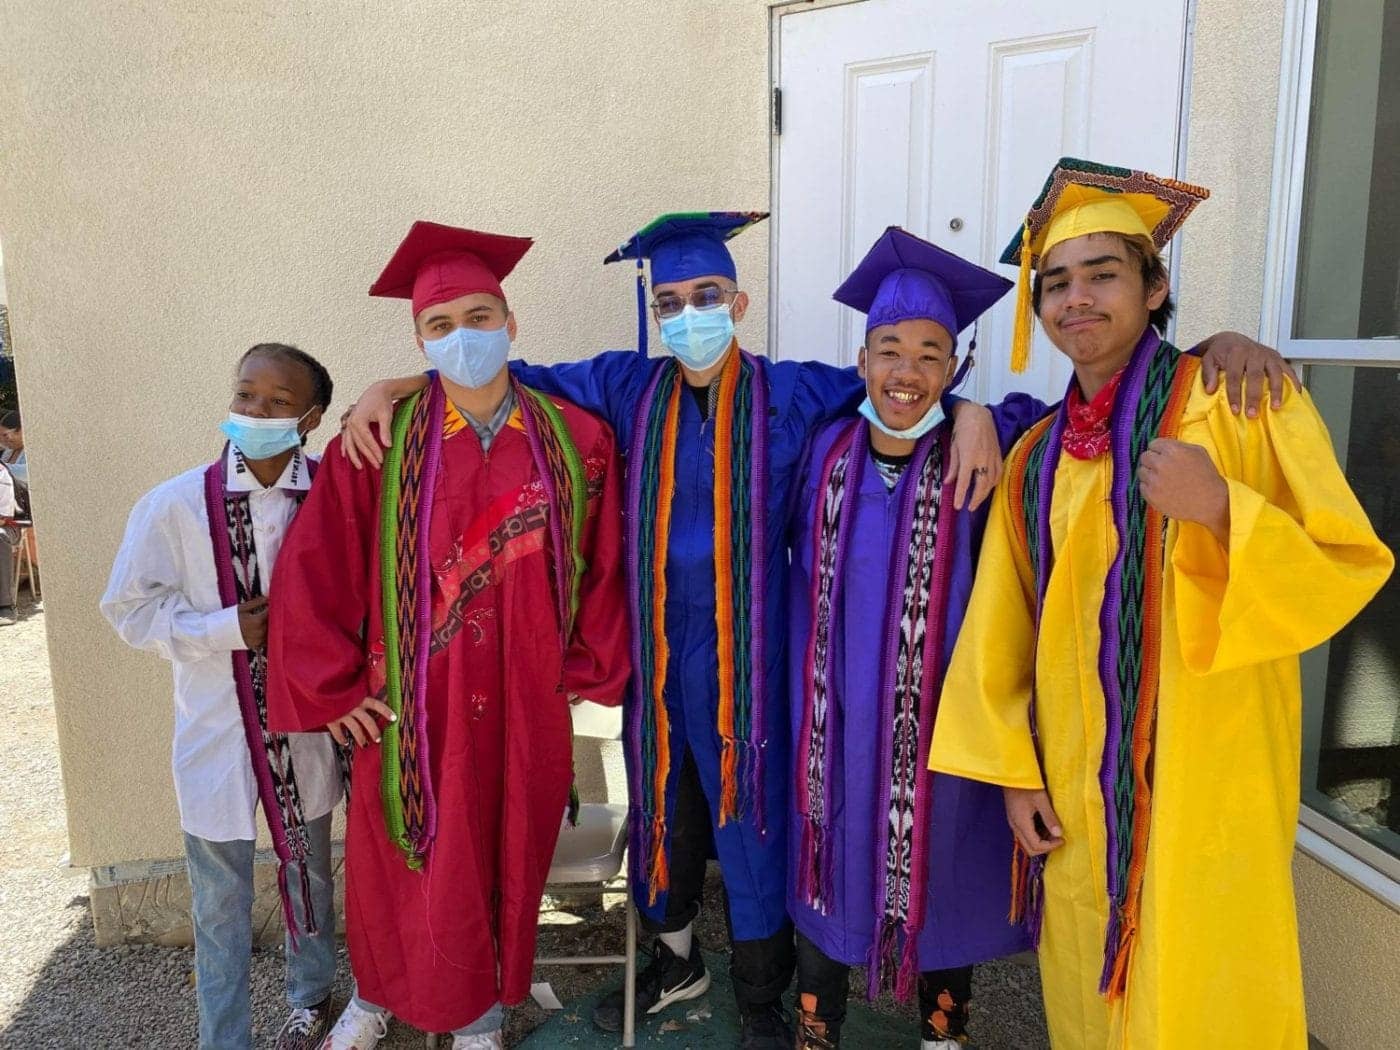 Ziair-Tiburcio-Akil-Amir-and-Kimo-graduating-from-Deecolonize-Academy-2021-by-Tiny-Gray-Garcia-POOR-Magazine-2021-1400x1050, College in Covid: A nightmare of access for Poor, Black, Brown, Indigenous and Disabled students in the US, Culture Currents 